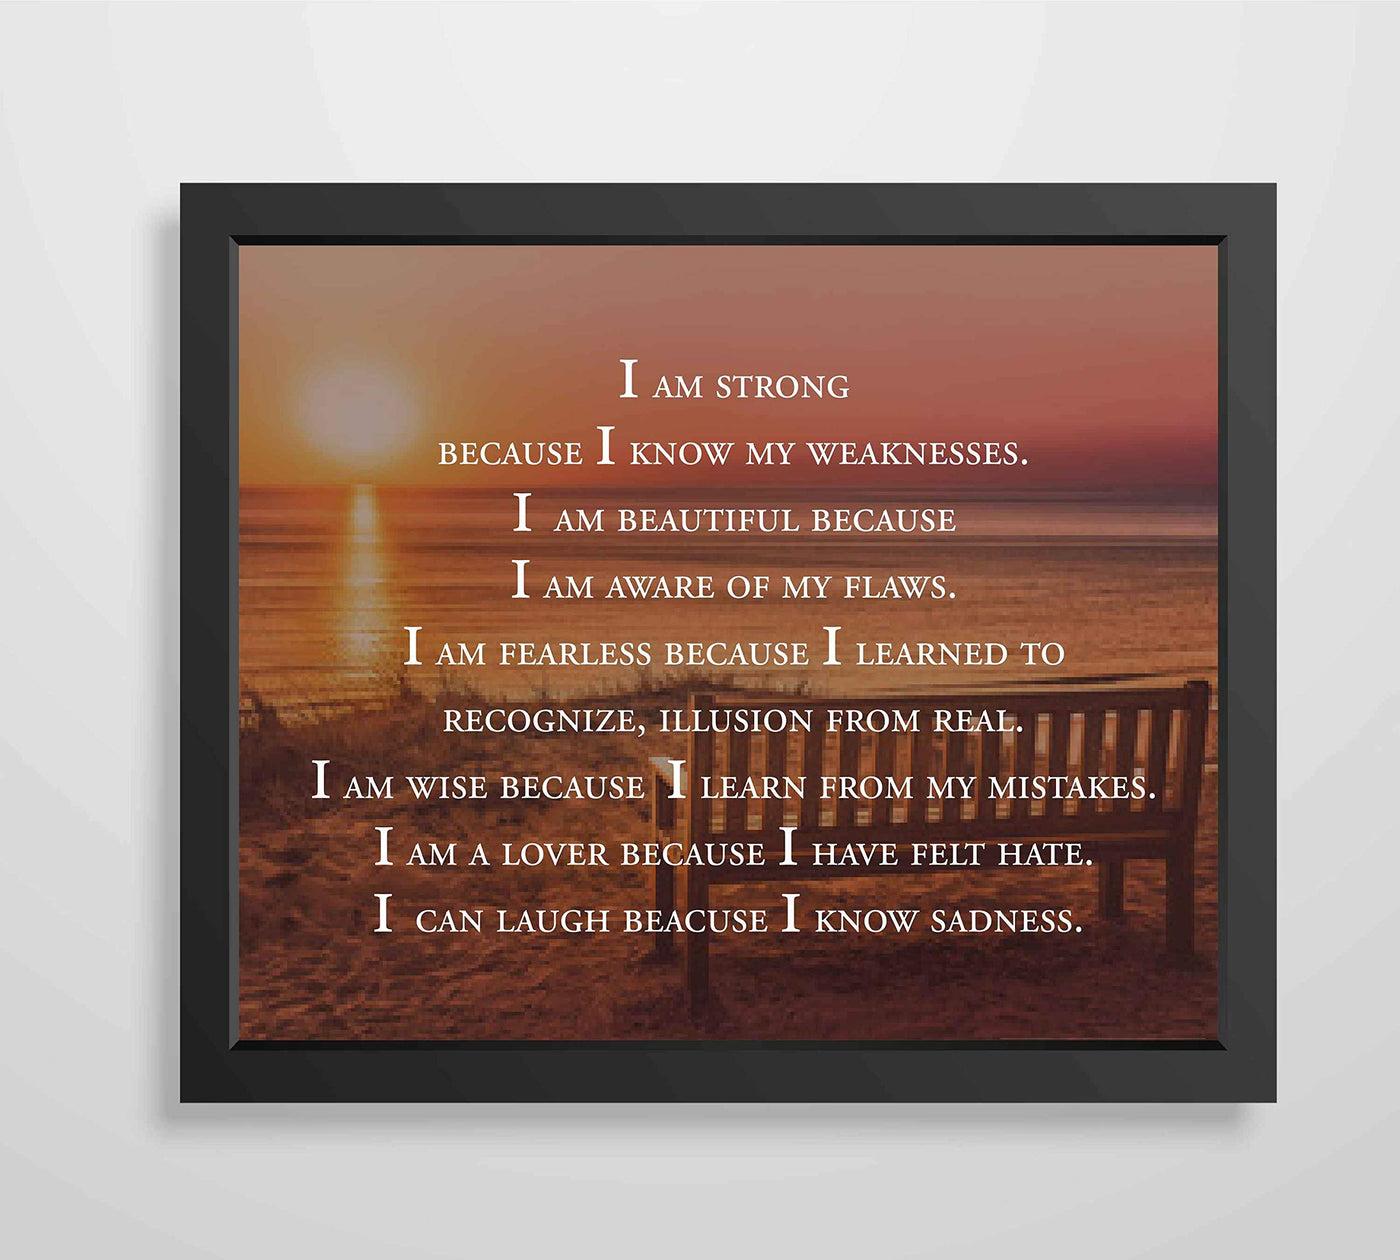 I Am Strong Because I Know My Weaknesses- Inspirational Quotes Wall Art- 10 x 8" Typographic Wall Sign-Ready to Frame. Modern Print for Home-Office-Classroom Decor. Great Motivational Gift for All!